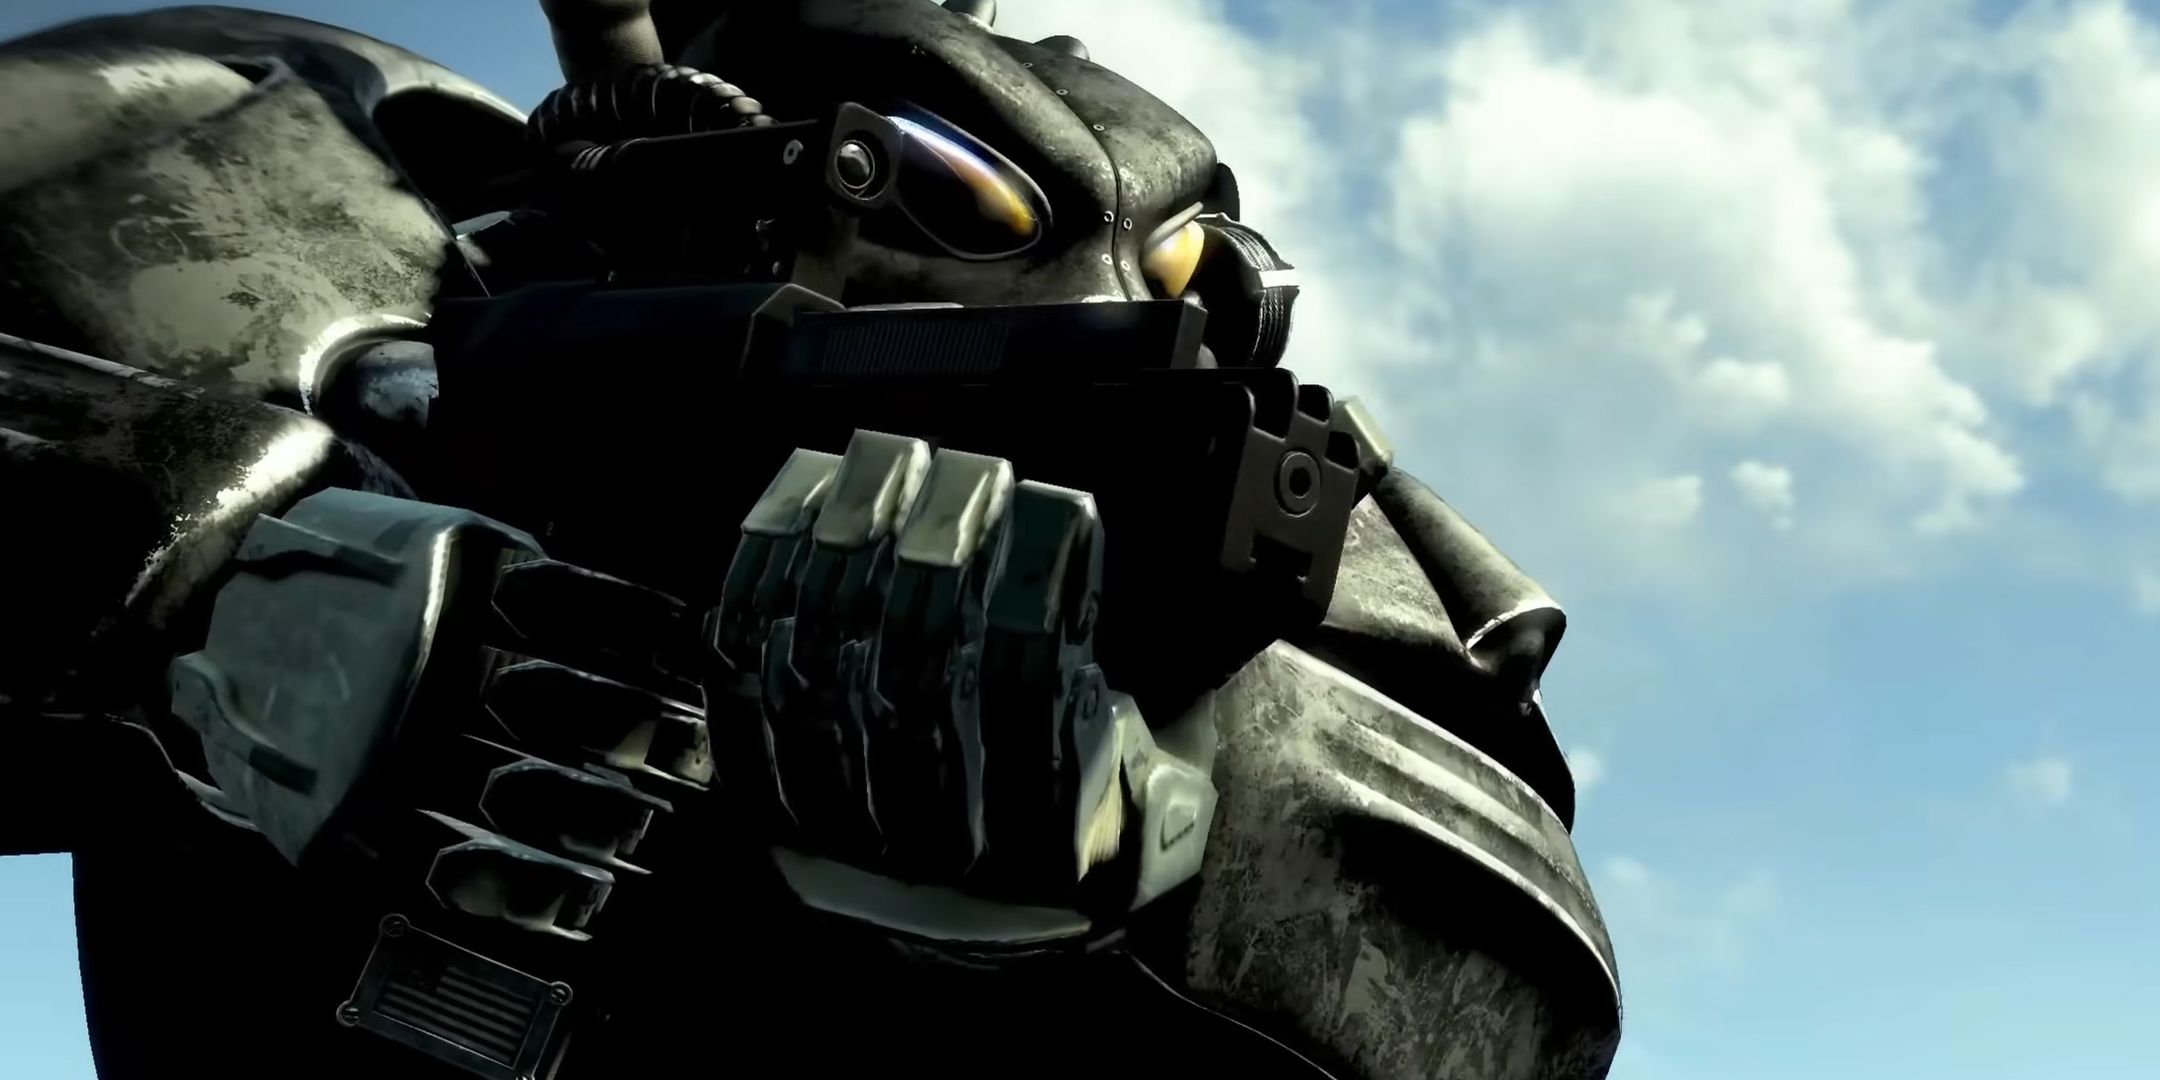 Fallout 2 fan made remake Enclave soldier in power armour holding a laser rifle